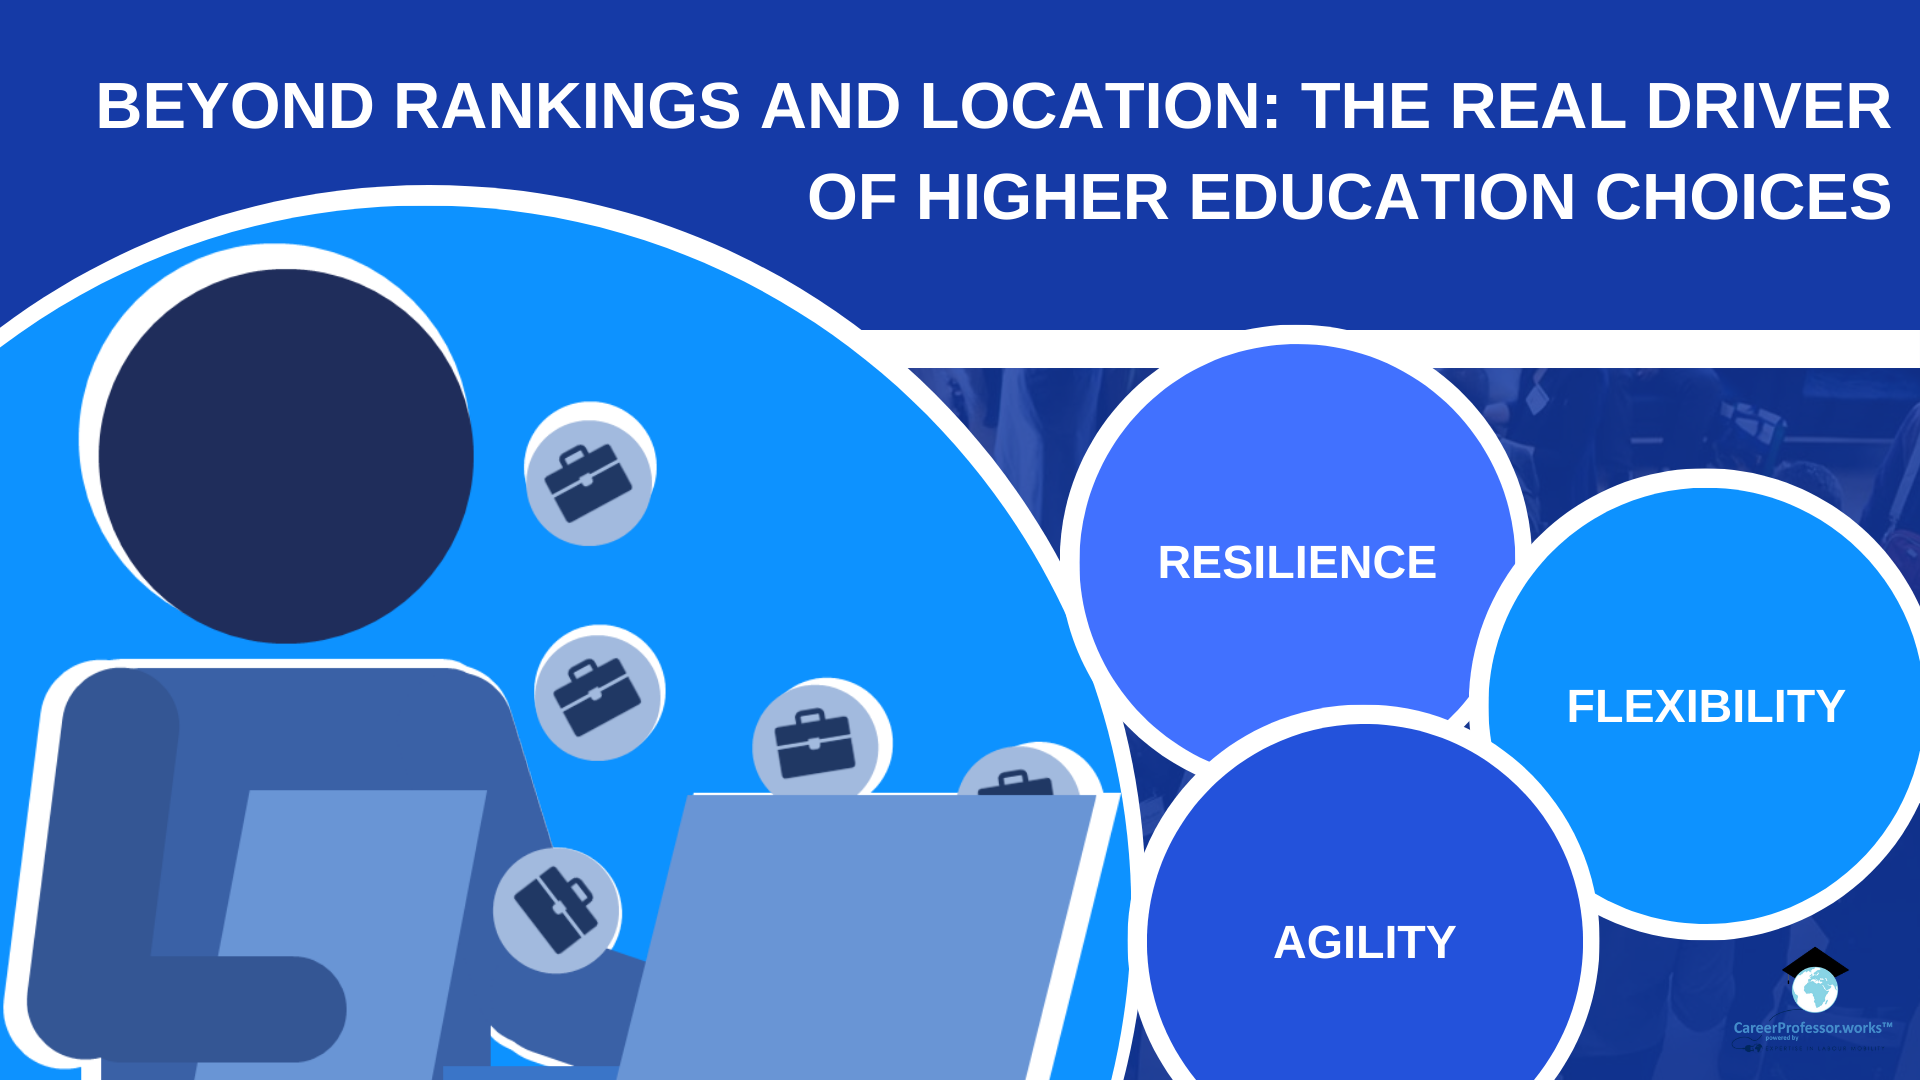 Beyond Rankings and Location: The Real Driver of Higher Education Choices